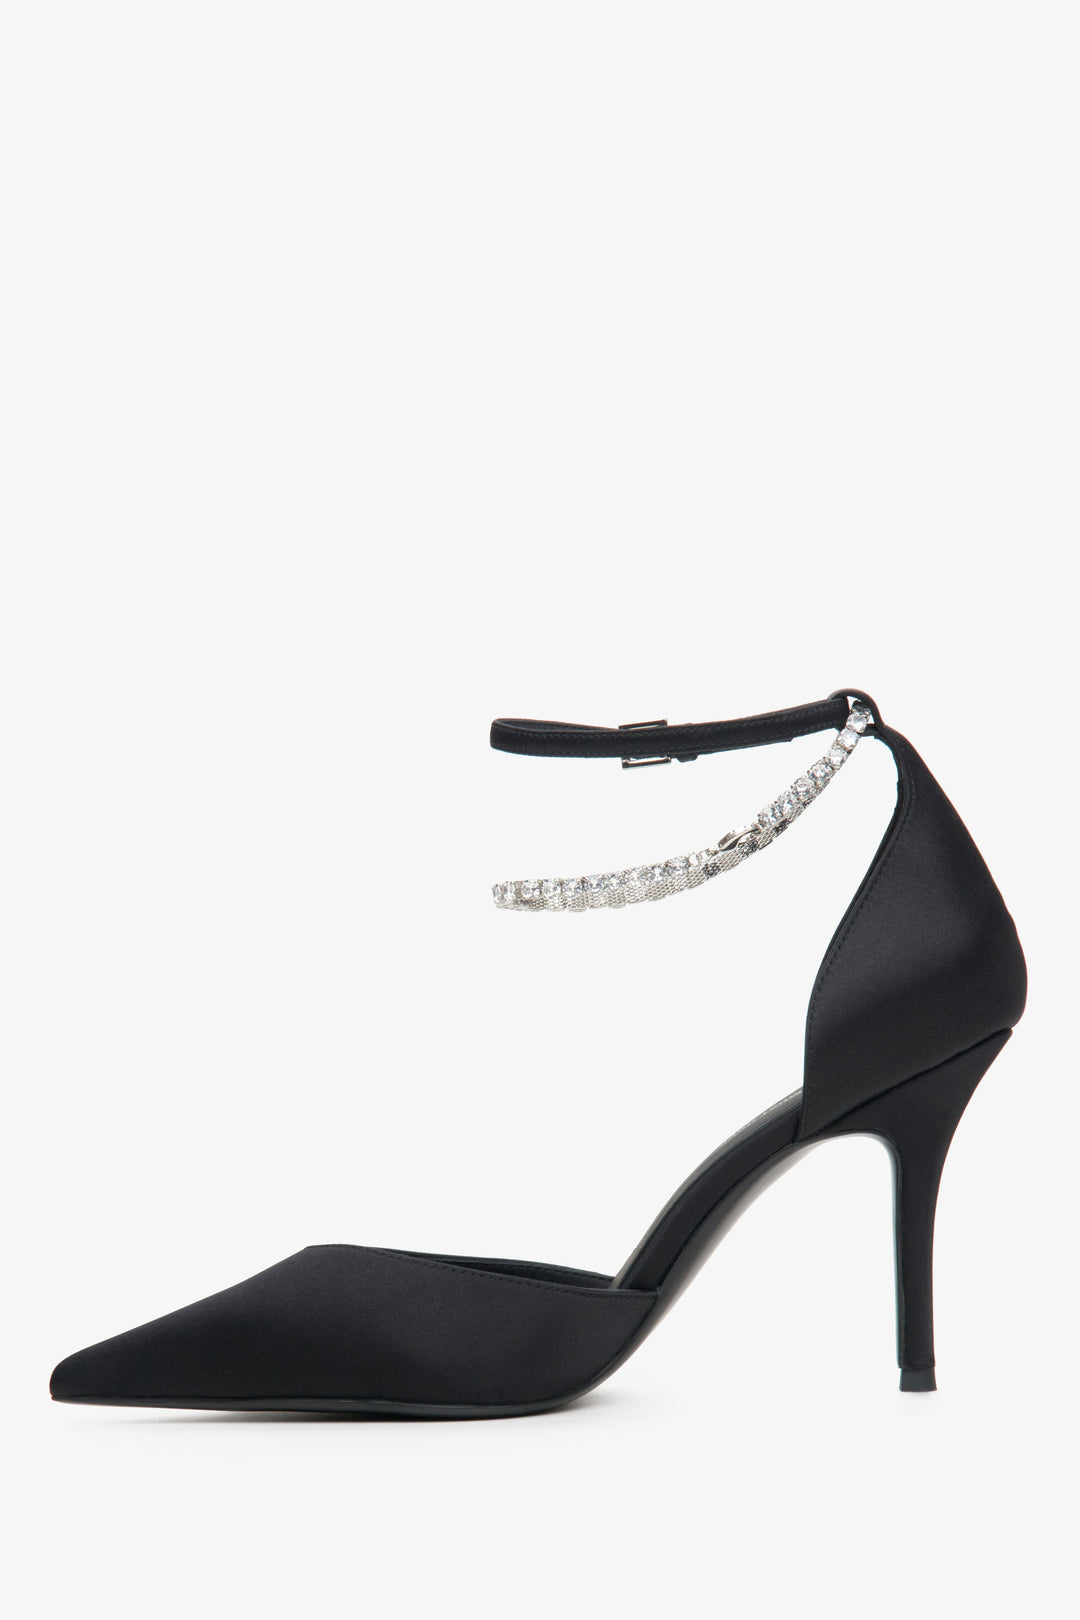 Women's black pointed toe pumps with crystals by Estro x MustHave.